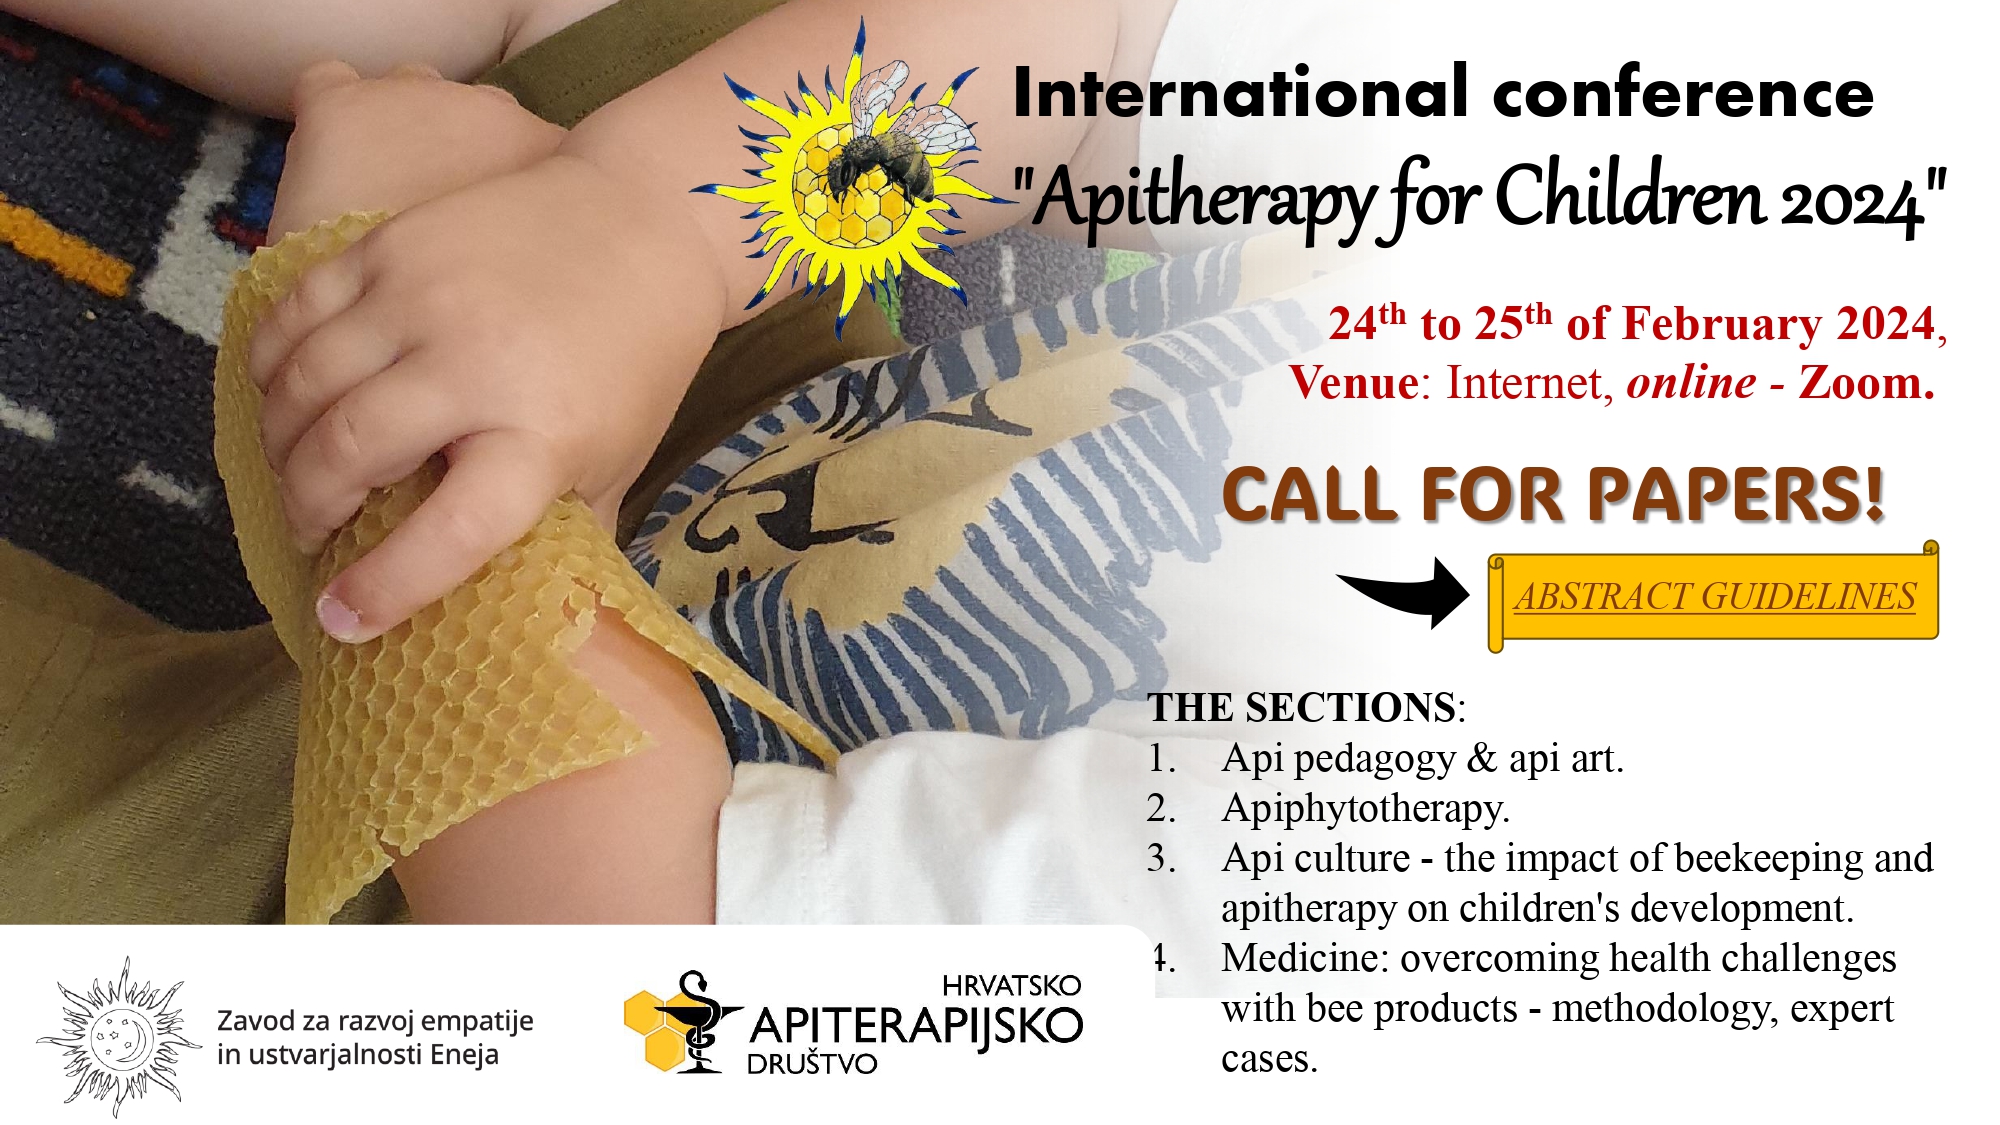 Apitherapy for children